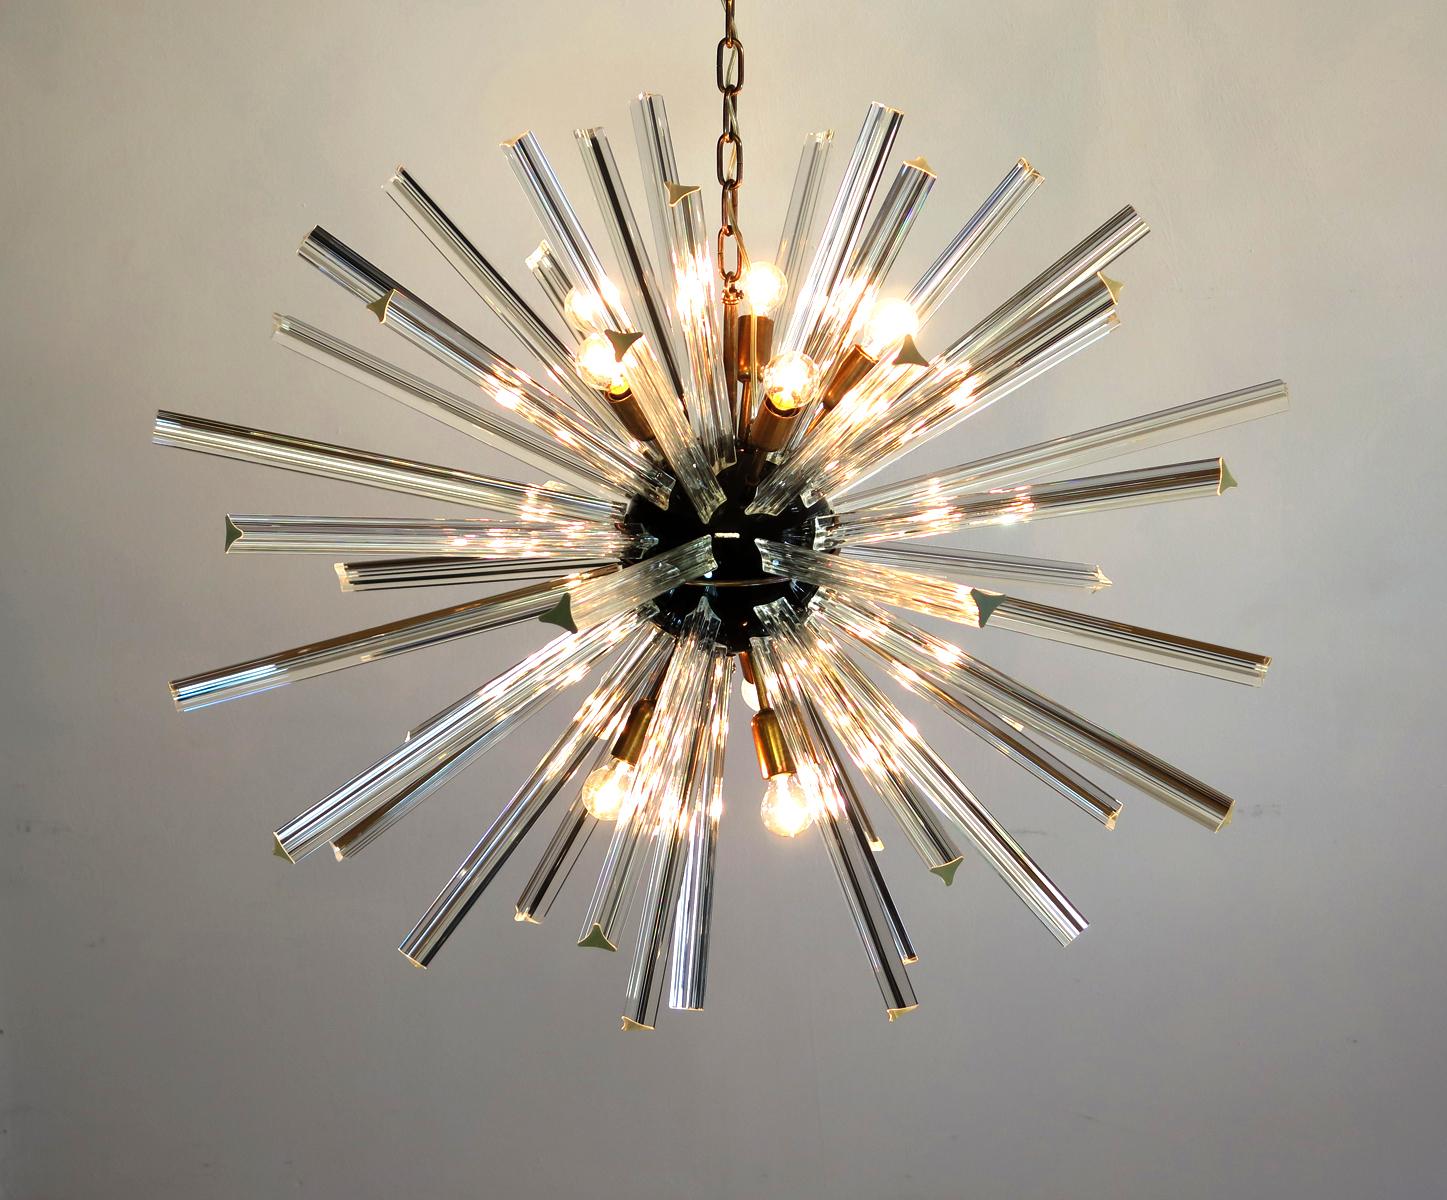 Pair Italian Sputnik chandeliers surrounding 50 crystal glass 'triedri' prisms radiating from a center black metal nucleus. Brass lamp holder.
Period: late 20th century
Dimensions: 51,20 inches (130 cm) height with chain; 27,55 inches (70 cm) height